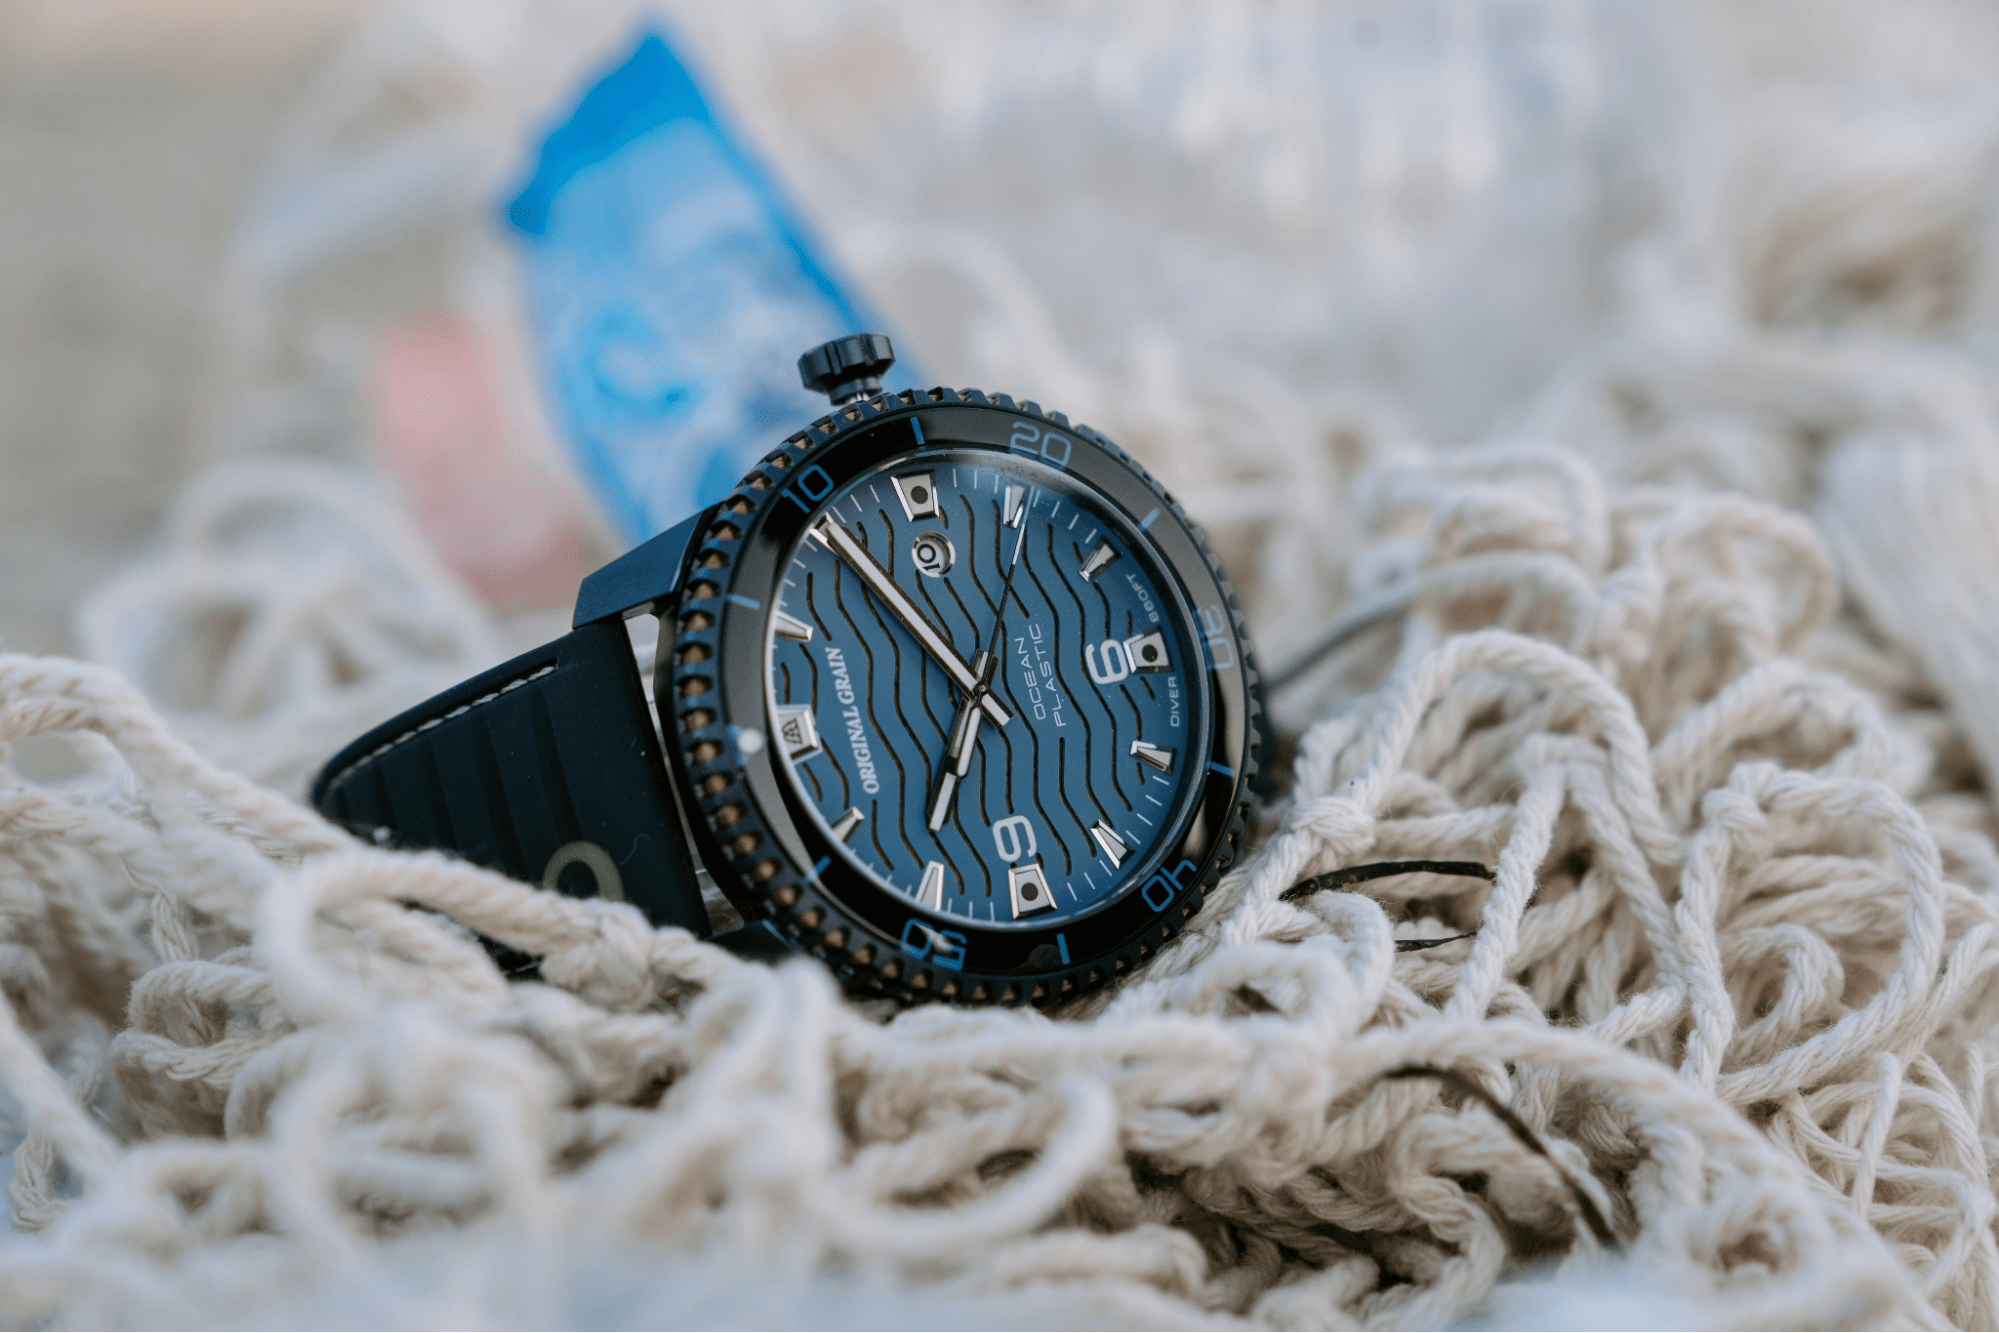 Image of Original Grain Sports Diver watch in pile of fishing rope